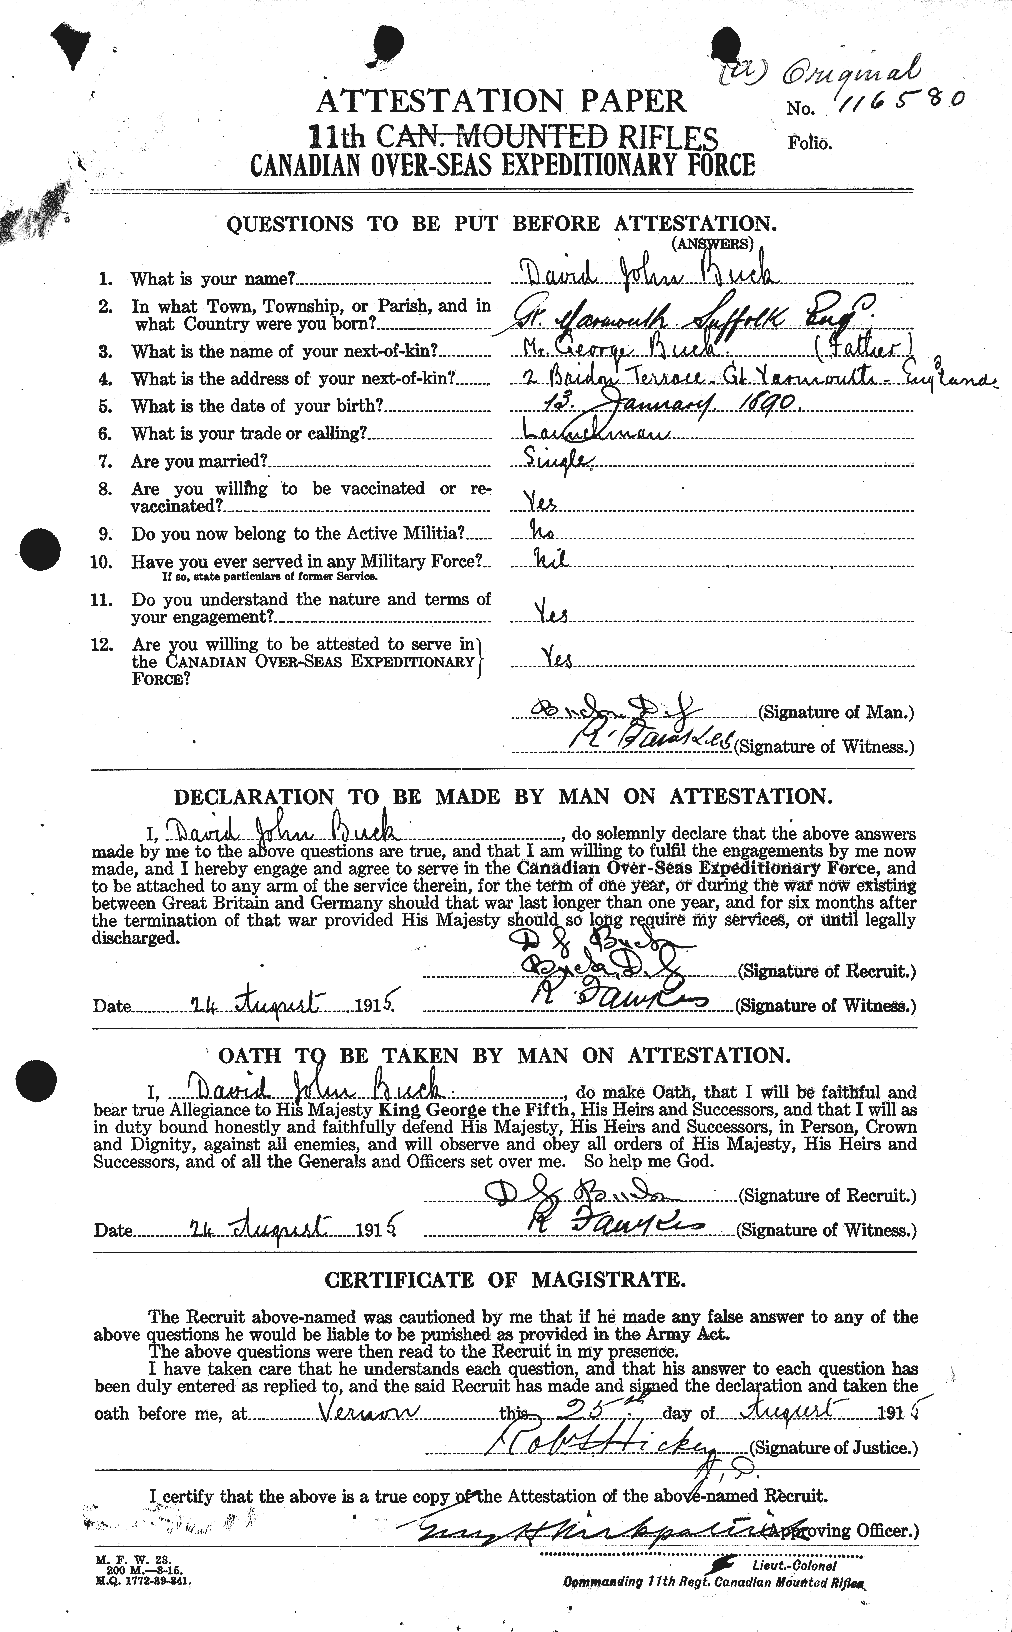 Personnel Records of the First World War - CEF 269269a